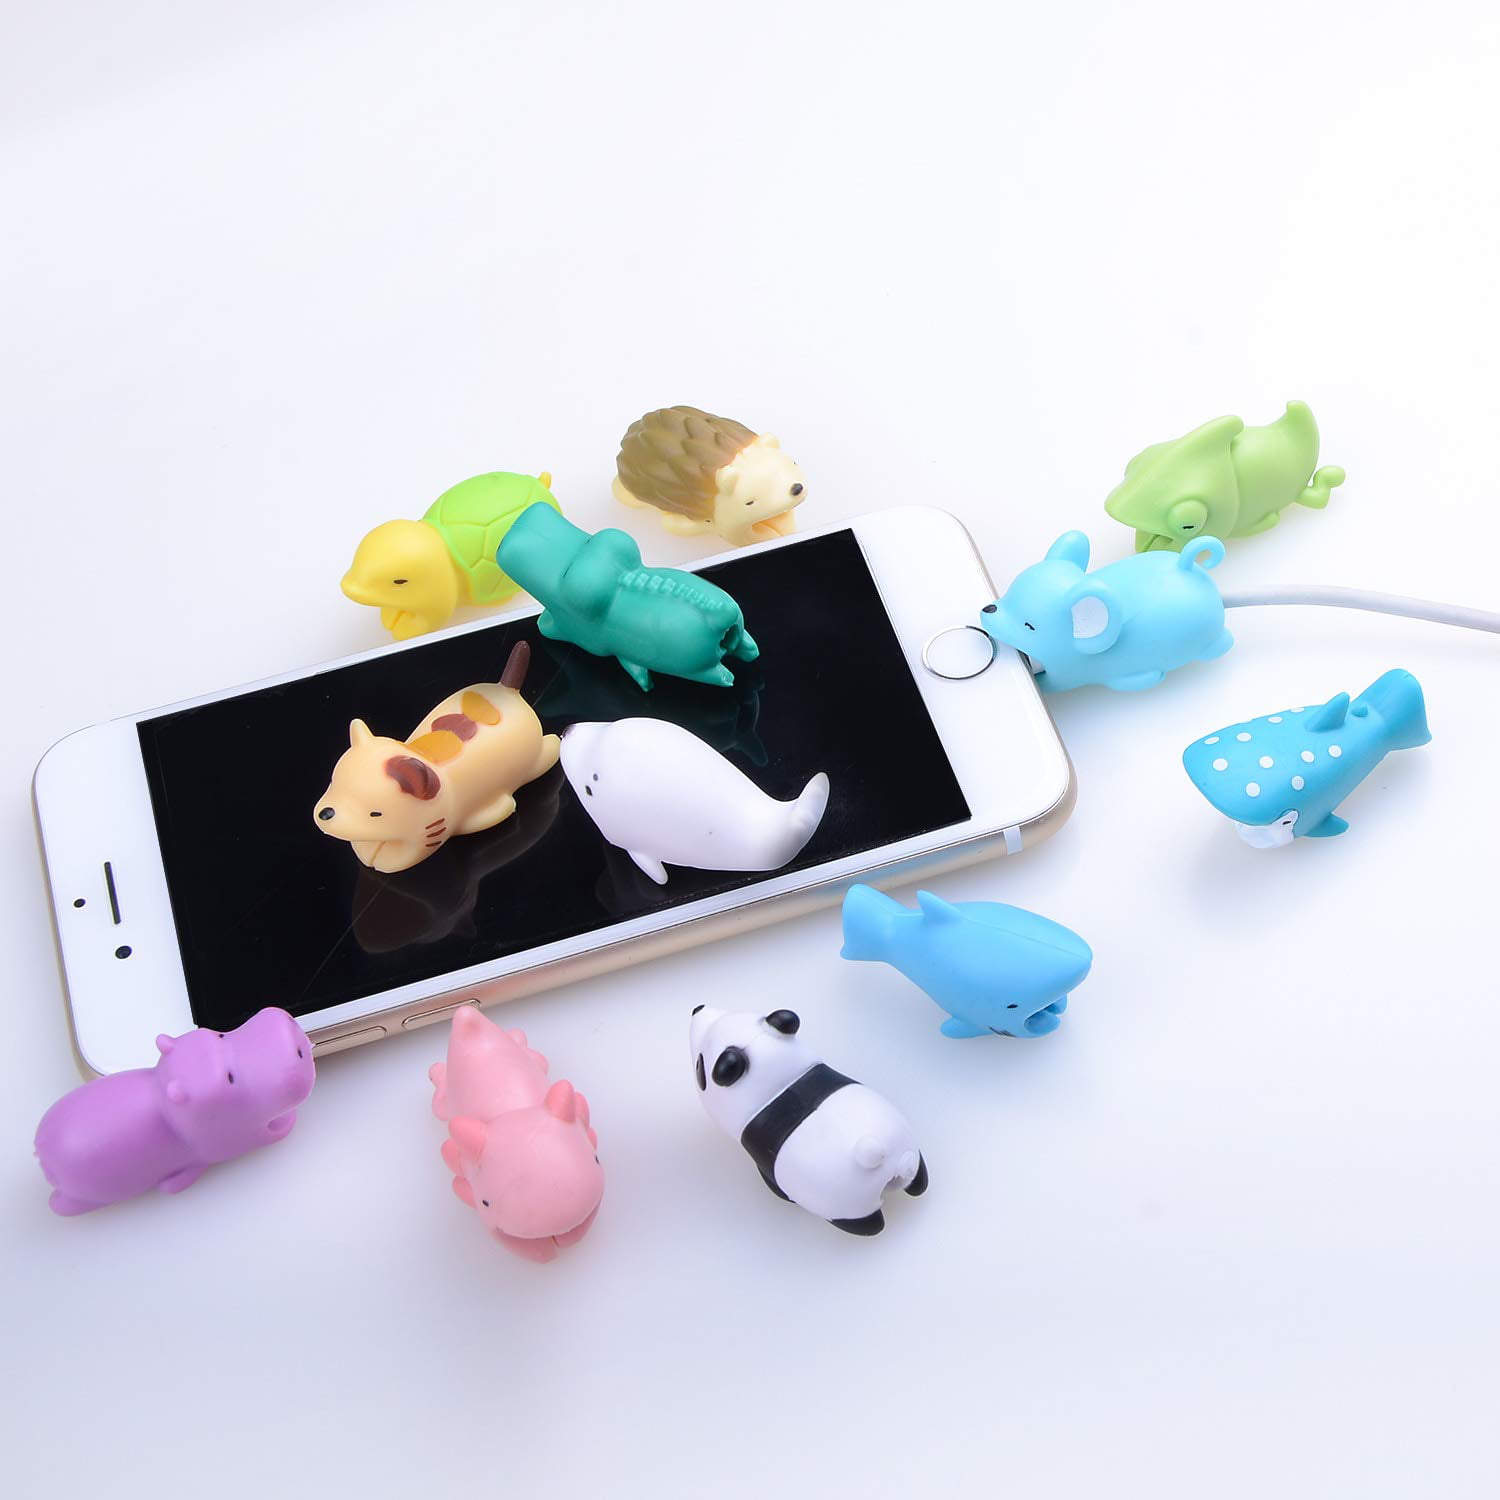 Animal Bite Cable Protector 5 Pack with 2 Pack Cable Ties,Cute Cable Buddies Fit iPhone,Micro USB Type C Charging Cords Data Line Protection with a Storage Case.